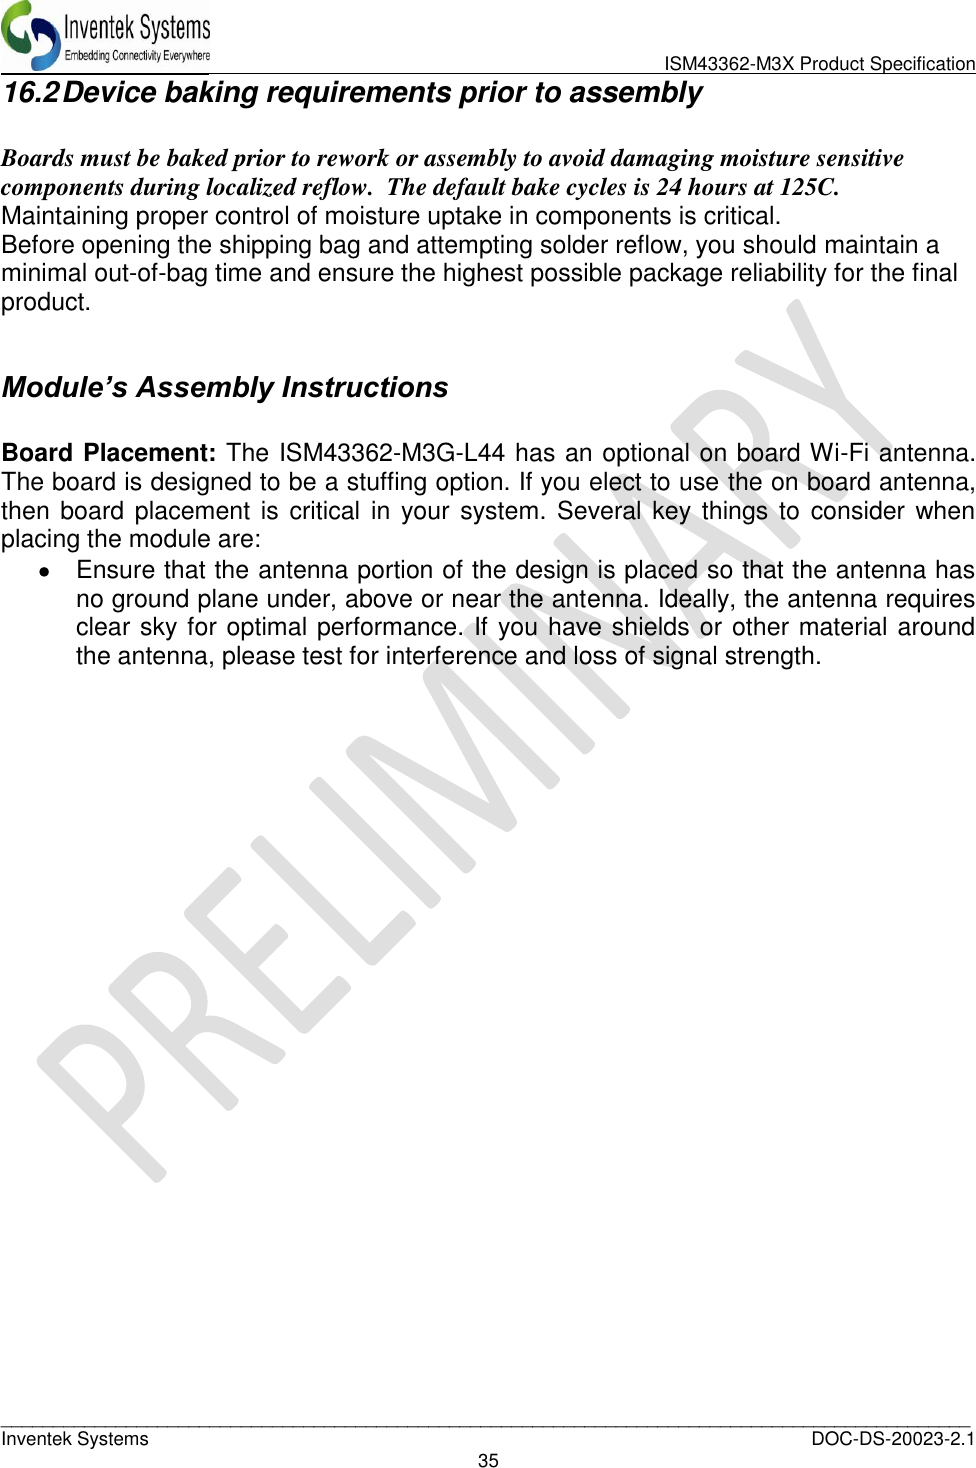                               ISM43362-M3X Product Specification _____________________________________________________________________________________________   Inventek Systems  DOC-DS-20023-2.1 35  16.2 Device baking requirements prior to assembly  Boards must be baked prior to rework or assembly to avoid damaging moisture sensitive components during localized reflow.  The default bake cycles is 24 hours at 125C.  Maintaining proper control of moisture uptake in components is critical. Before opening the shipping bag and attempting solder reflow, you should maintain a minimal out-of-bag time and ensure the highest possible package reliability for the final product.  Module’s Assembly Instructions  Board Placement: The ISM43362-M3G-L44 has an optional on board Wi-Fi antenna. The board is designed to be a stuffing option. If you elect to use the on board antenna, then board placement is critical in your system.  Several key things to consider when placing the module are:   Ensure that the antenna portion of the design is placed so that the antenna has no ground plane under, above or near the antenna. Ideally, the antenna requires clear sky for optimal performance. If you have shields or other material around the antenna, please test for interference and loss of signal strength. 